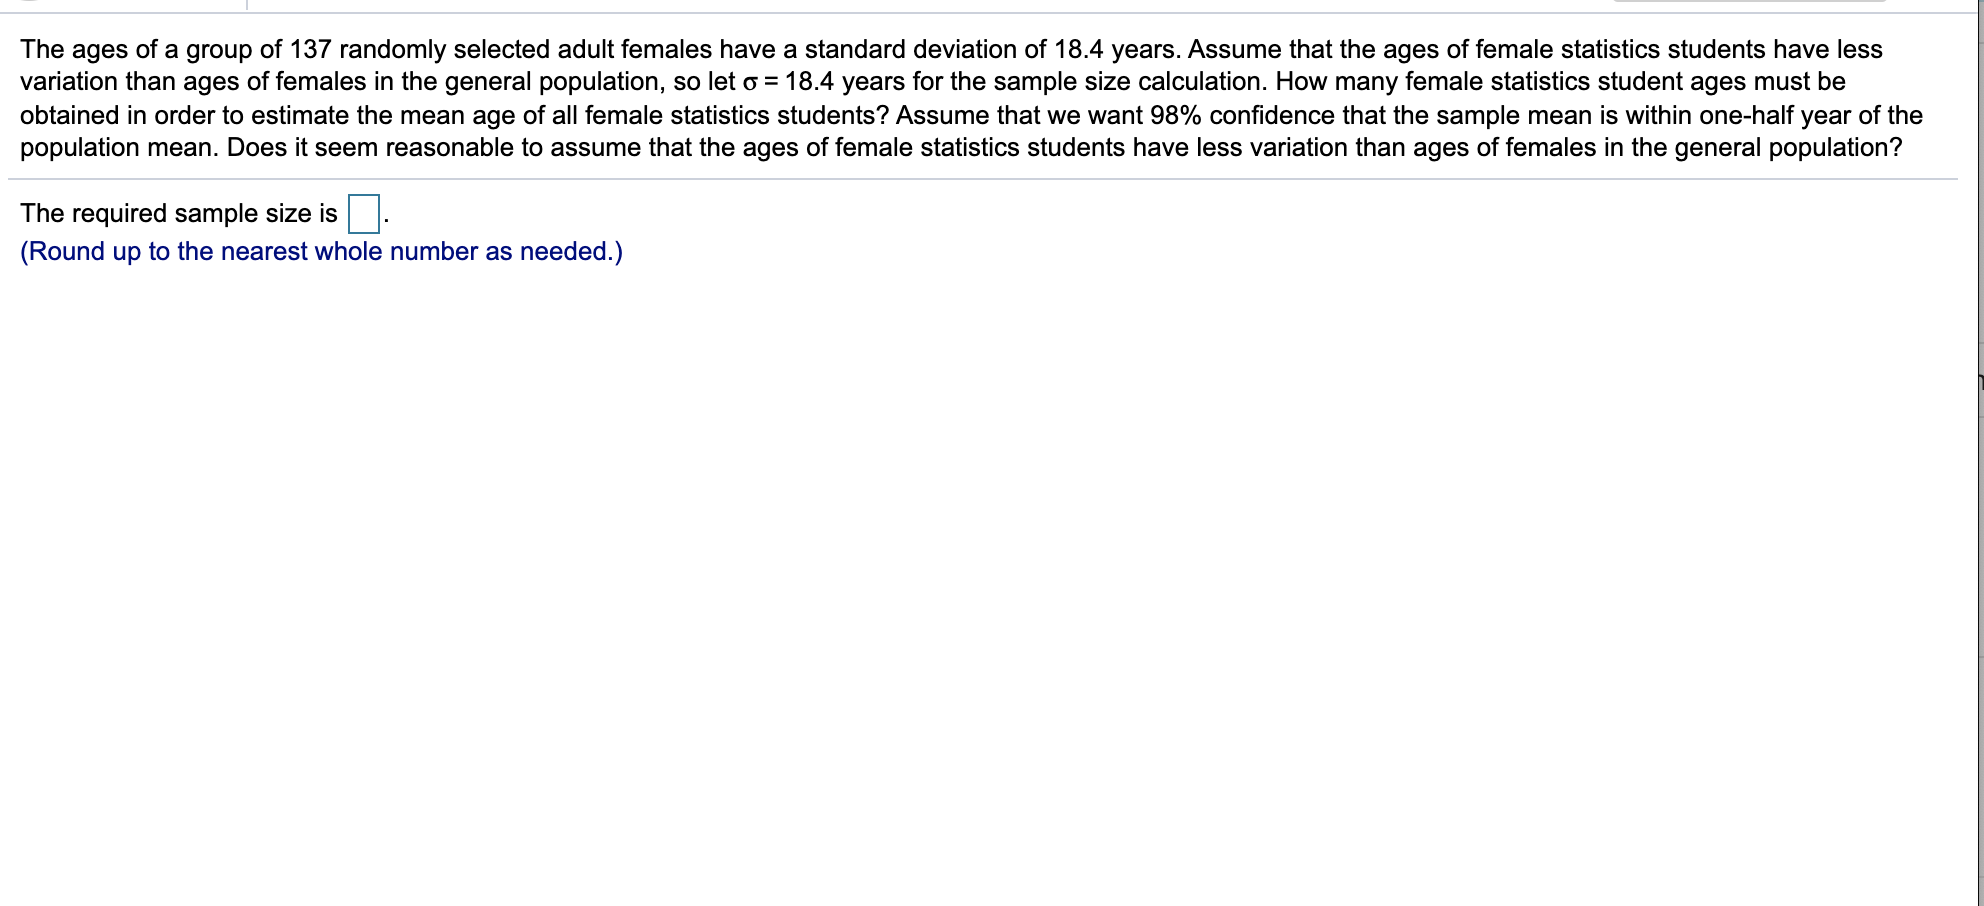 ages of a
variation than ages of females in the general population, so let o = 18.4 years for the sample size calculation. How many female statistics student ages must be
obtained in order to estimate the mean age of all female statistics students? Assume that we want 98% confidence that the sample mean is within one-half year of the
population mean. Does it seem reasonable to assume that the ages of female statistics students have less variation than ages of females in the general population?
The
group
of 137 randomly selected adult females have a standard deviation of 18.4 years. Assume that the ages of female statistics students have less
The required sample size is.
(Round up to the nearest whole number as needed.)
